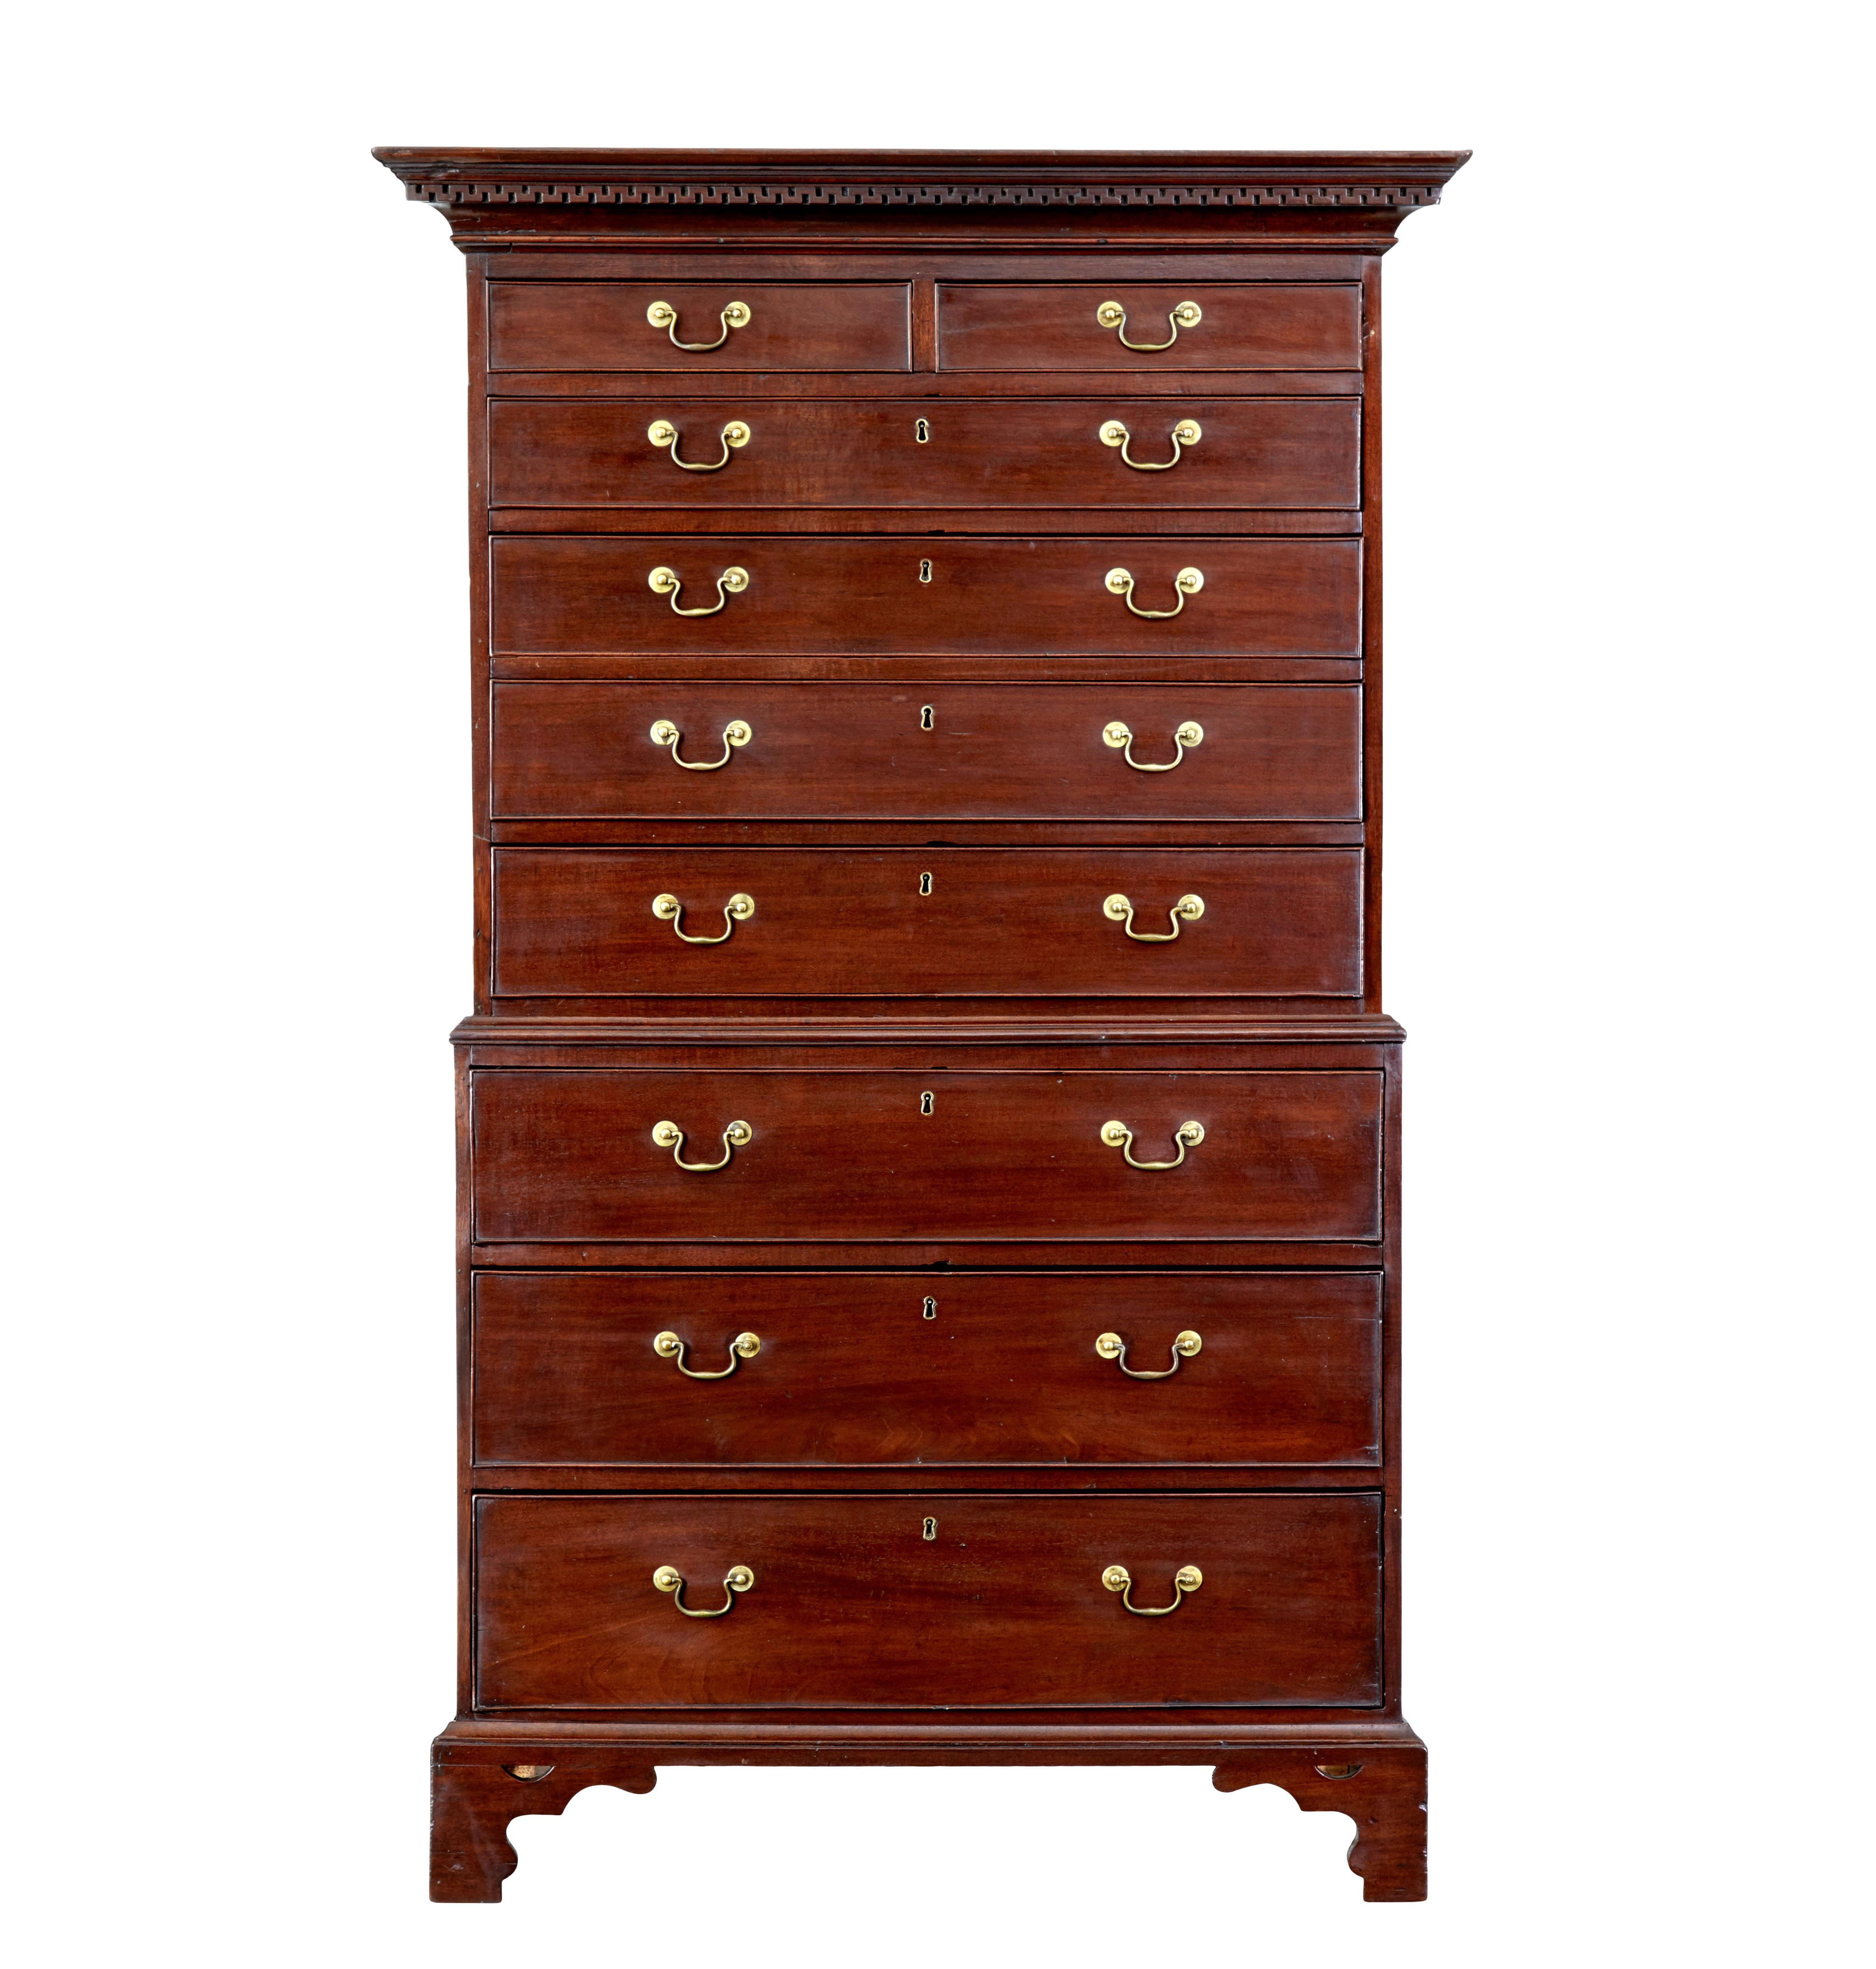 18th century Georgian mahogany chest on chest circa 1790.

Beautiful chest on chest of good proportions, comprising of a top and bottom section.

Elegant cornice with dentil greek key decoration going round the top.  Top section comprises of 2 over